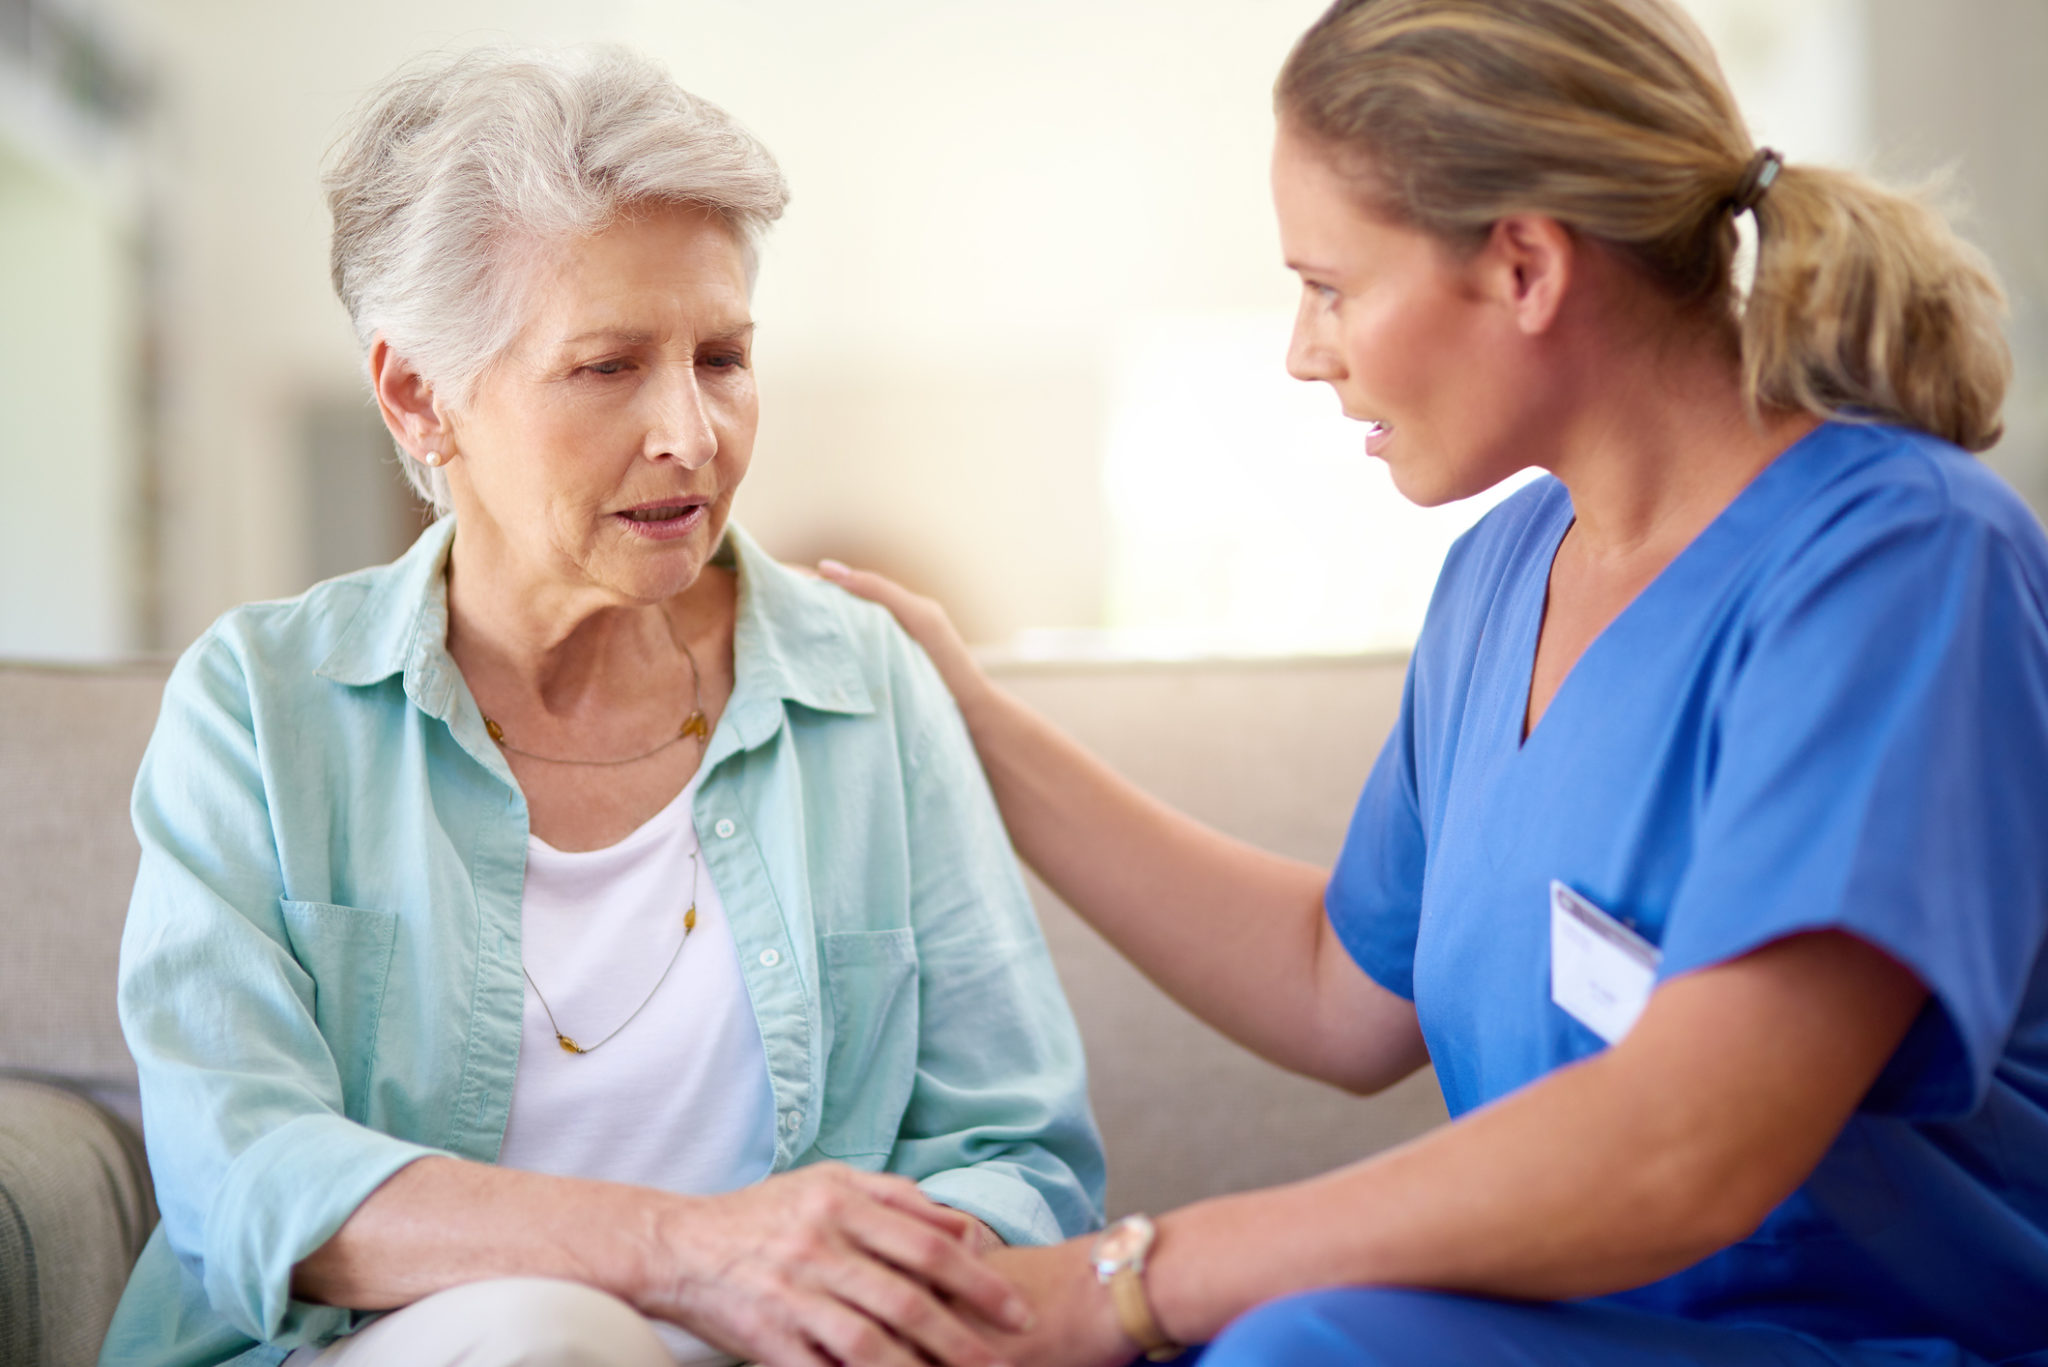 Shot of a caregiver consoling a senior patient in a nursing home